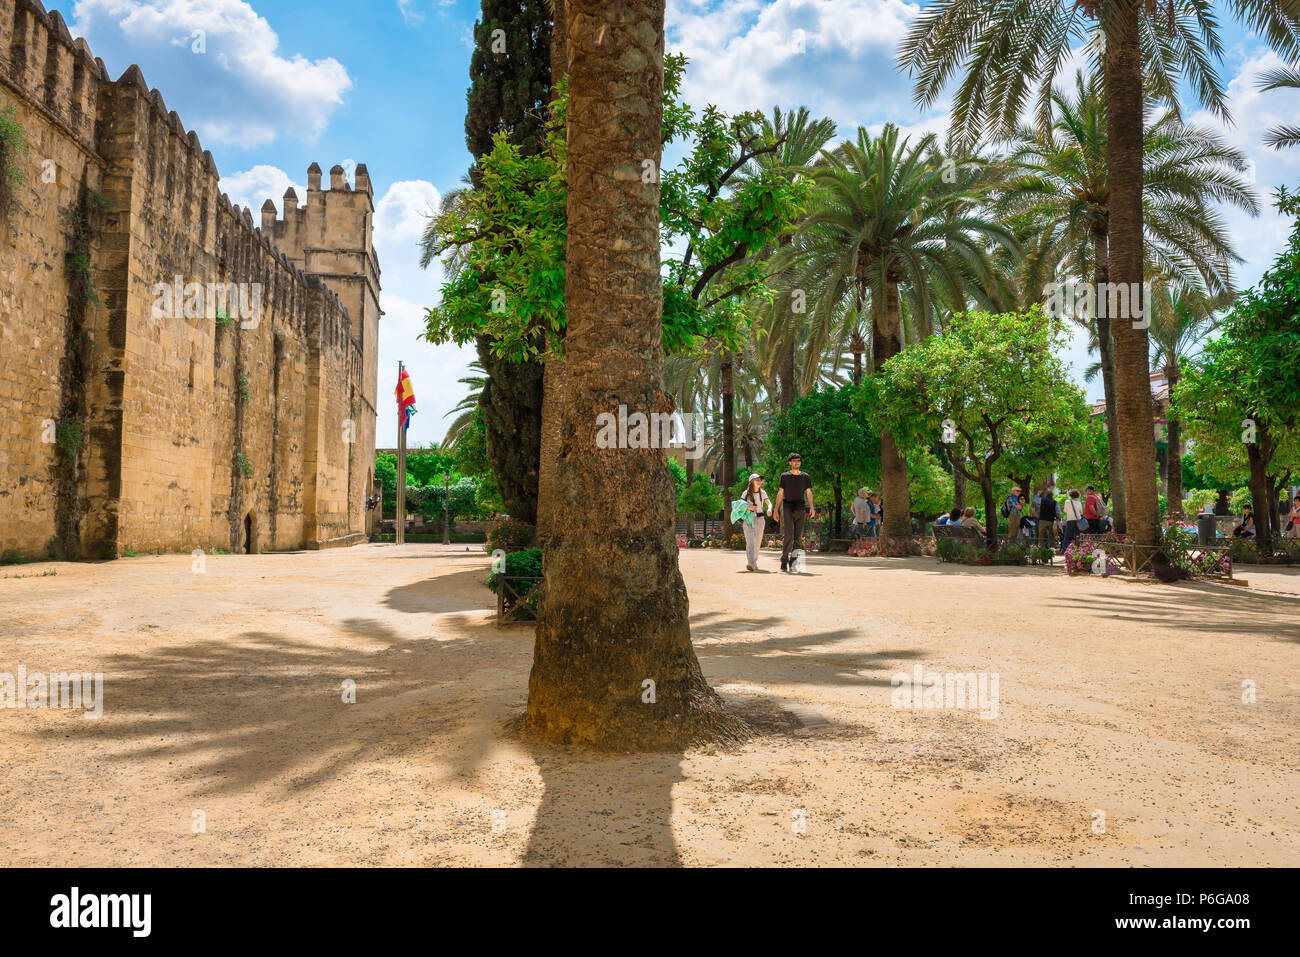 Andalucia Spain summer, a young couple stroll through a palm tree lined square outside the Alcazar de los Reyes Cristianos in Cordoba, Spain. Stock Photo